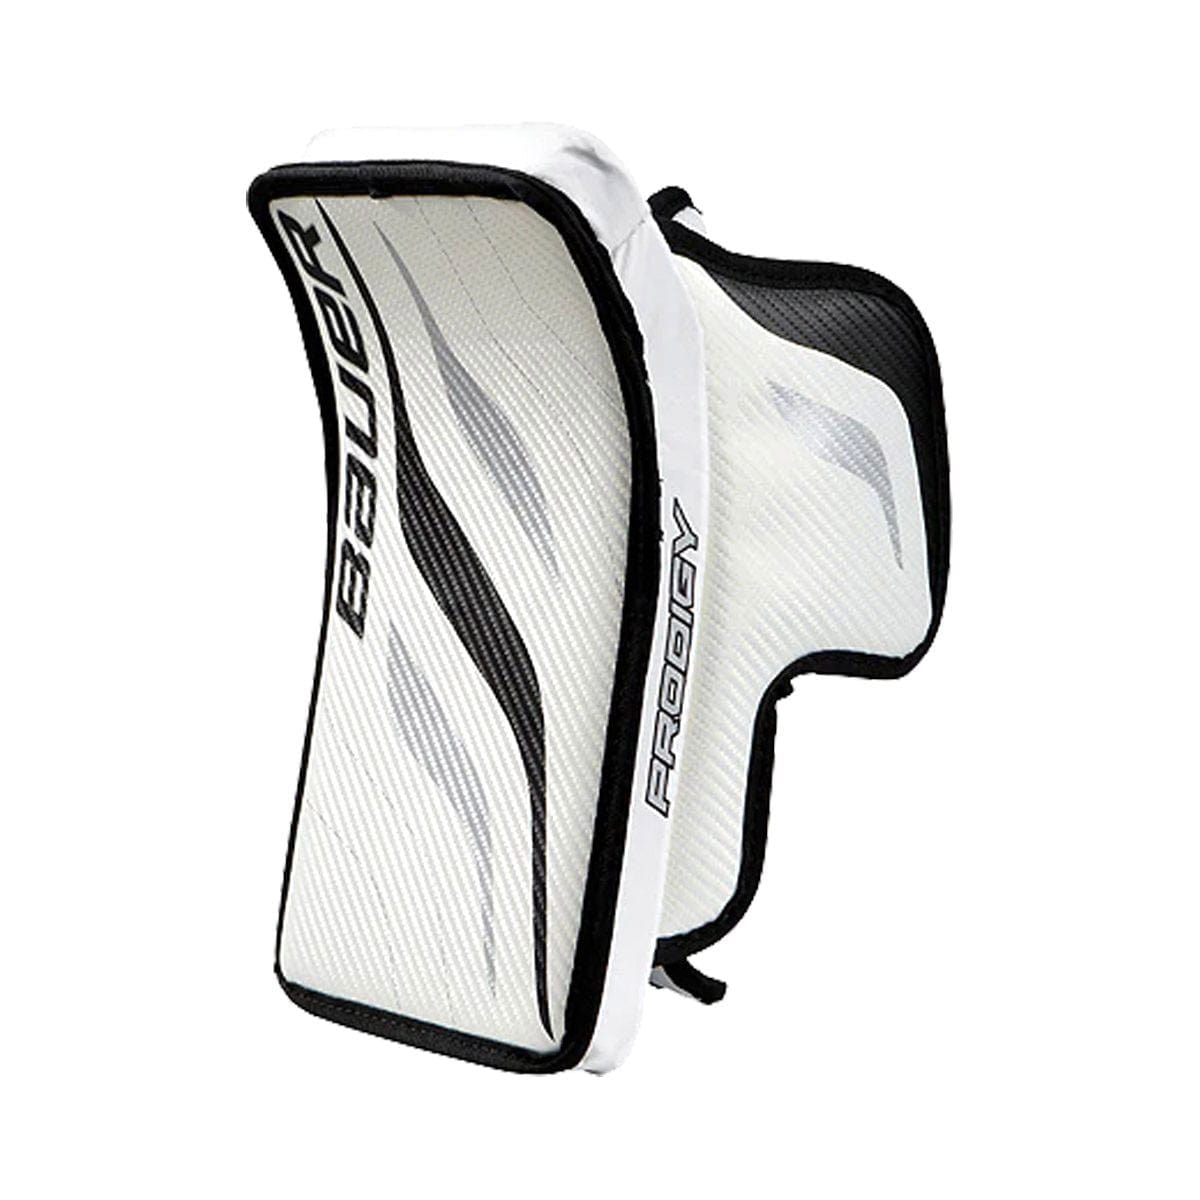 Bauer Prodigy Youth Goalie Blocker - The Hockey Shop Source For Sports